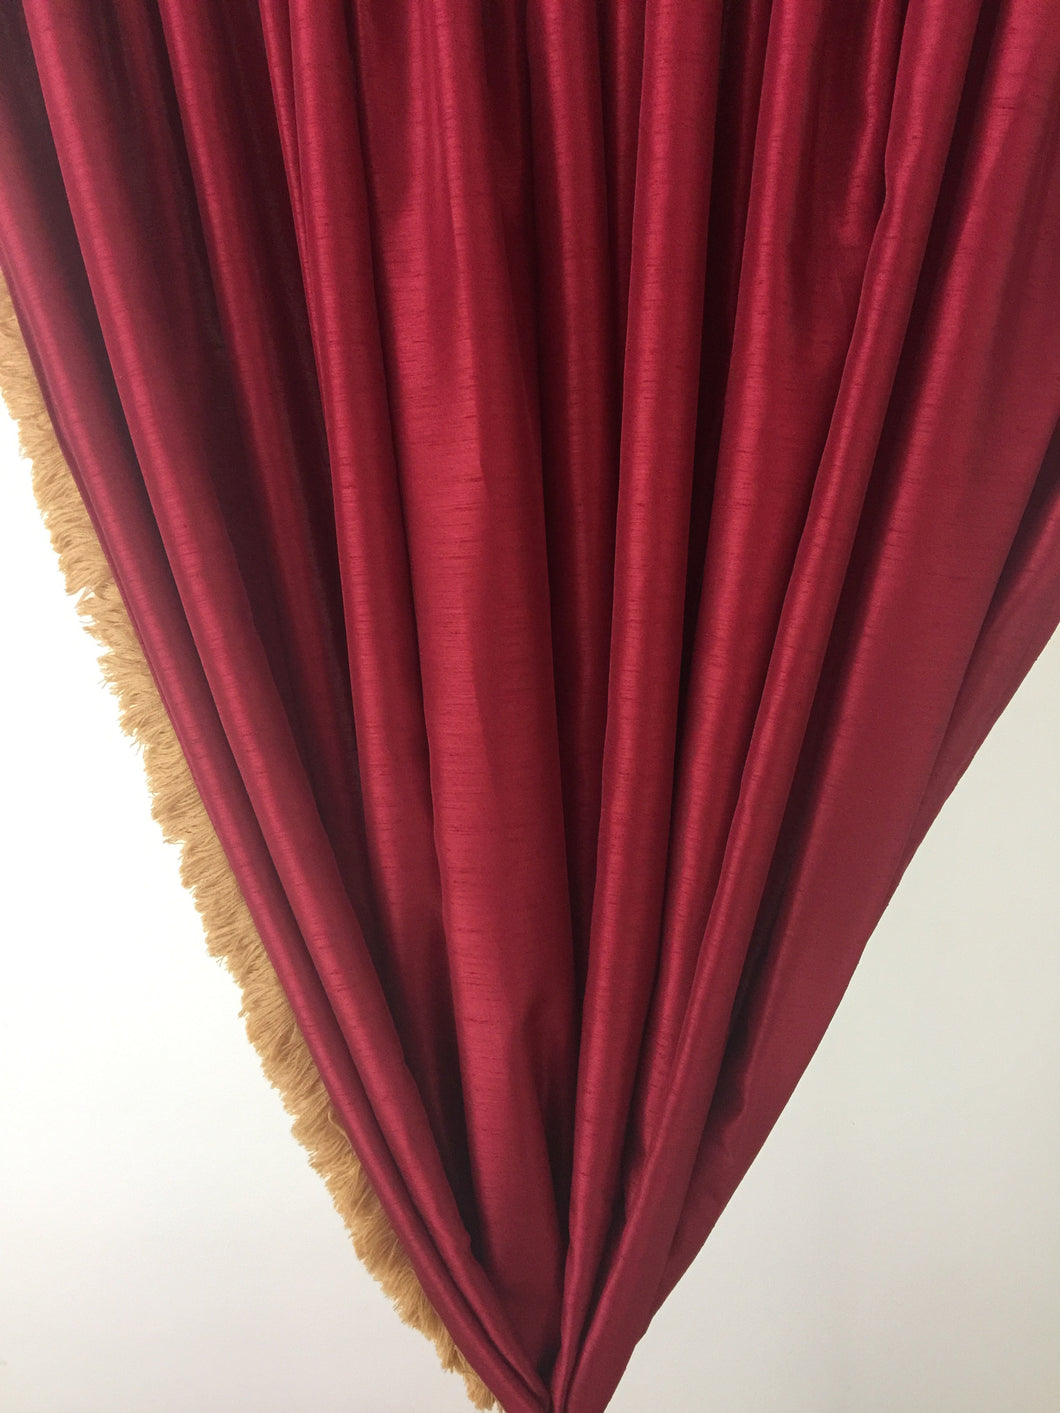 9061 - Red Silk with gold brush trim and fully trimmed swag valances